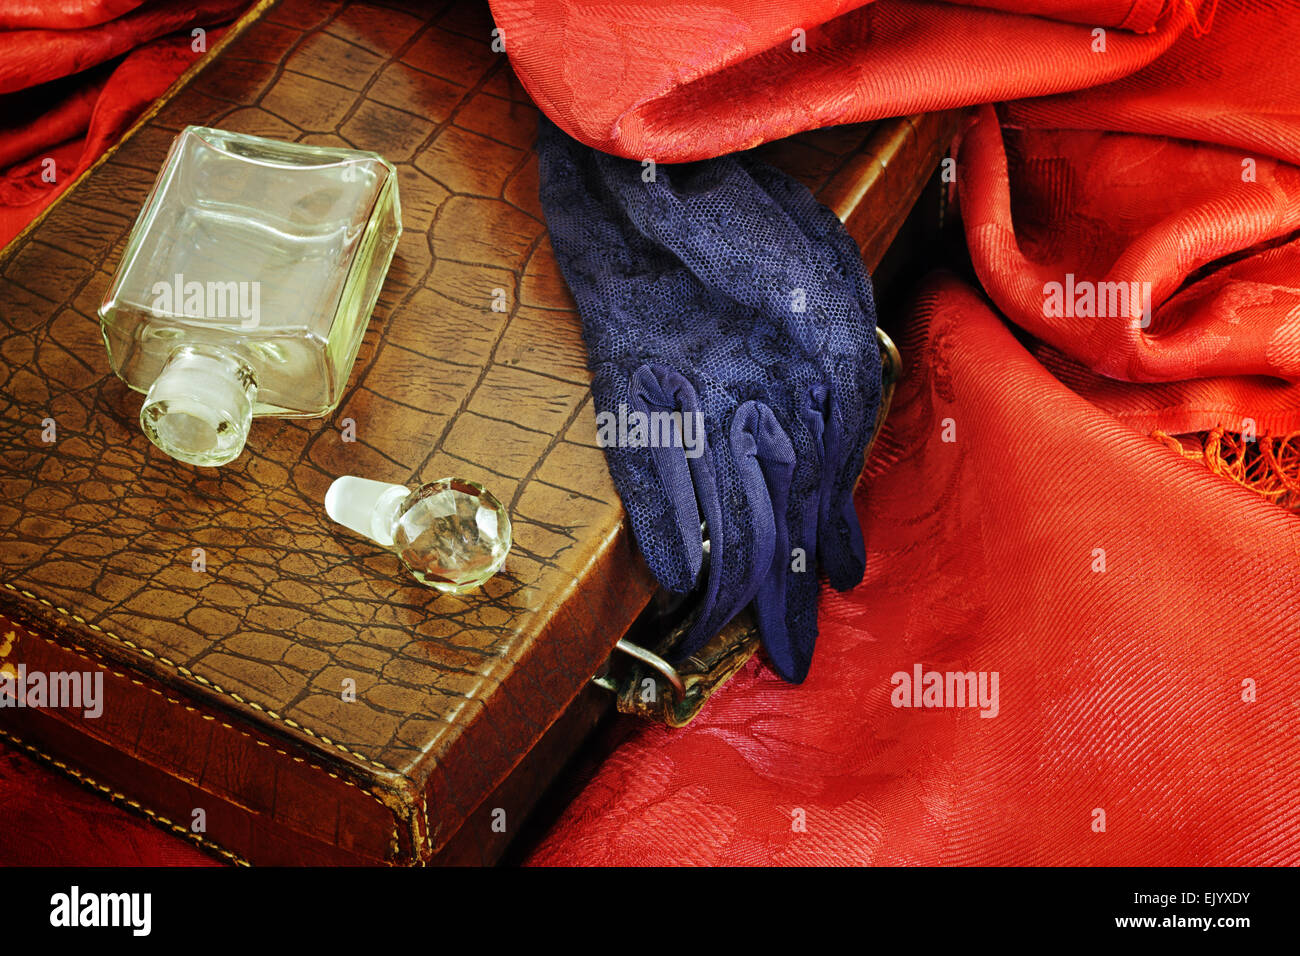 Bottle of perfume and leather bag on red textile Stock Photo